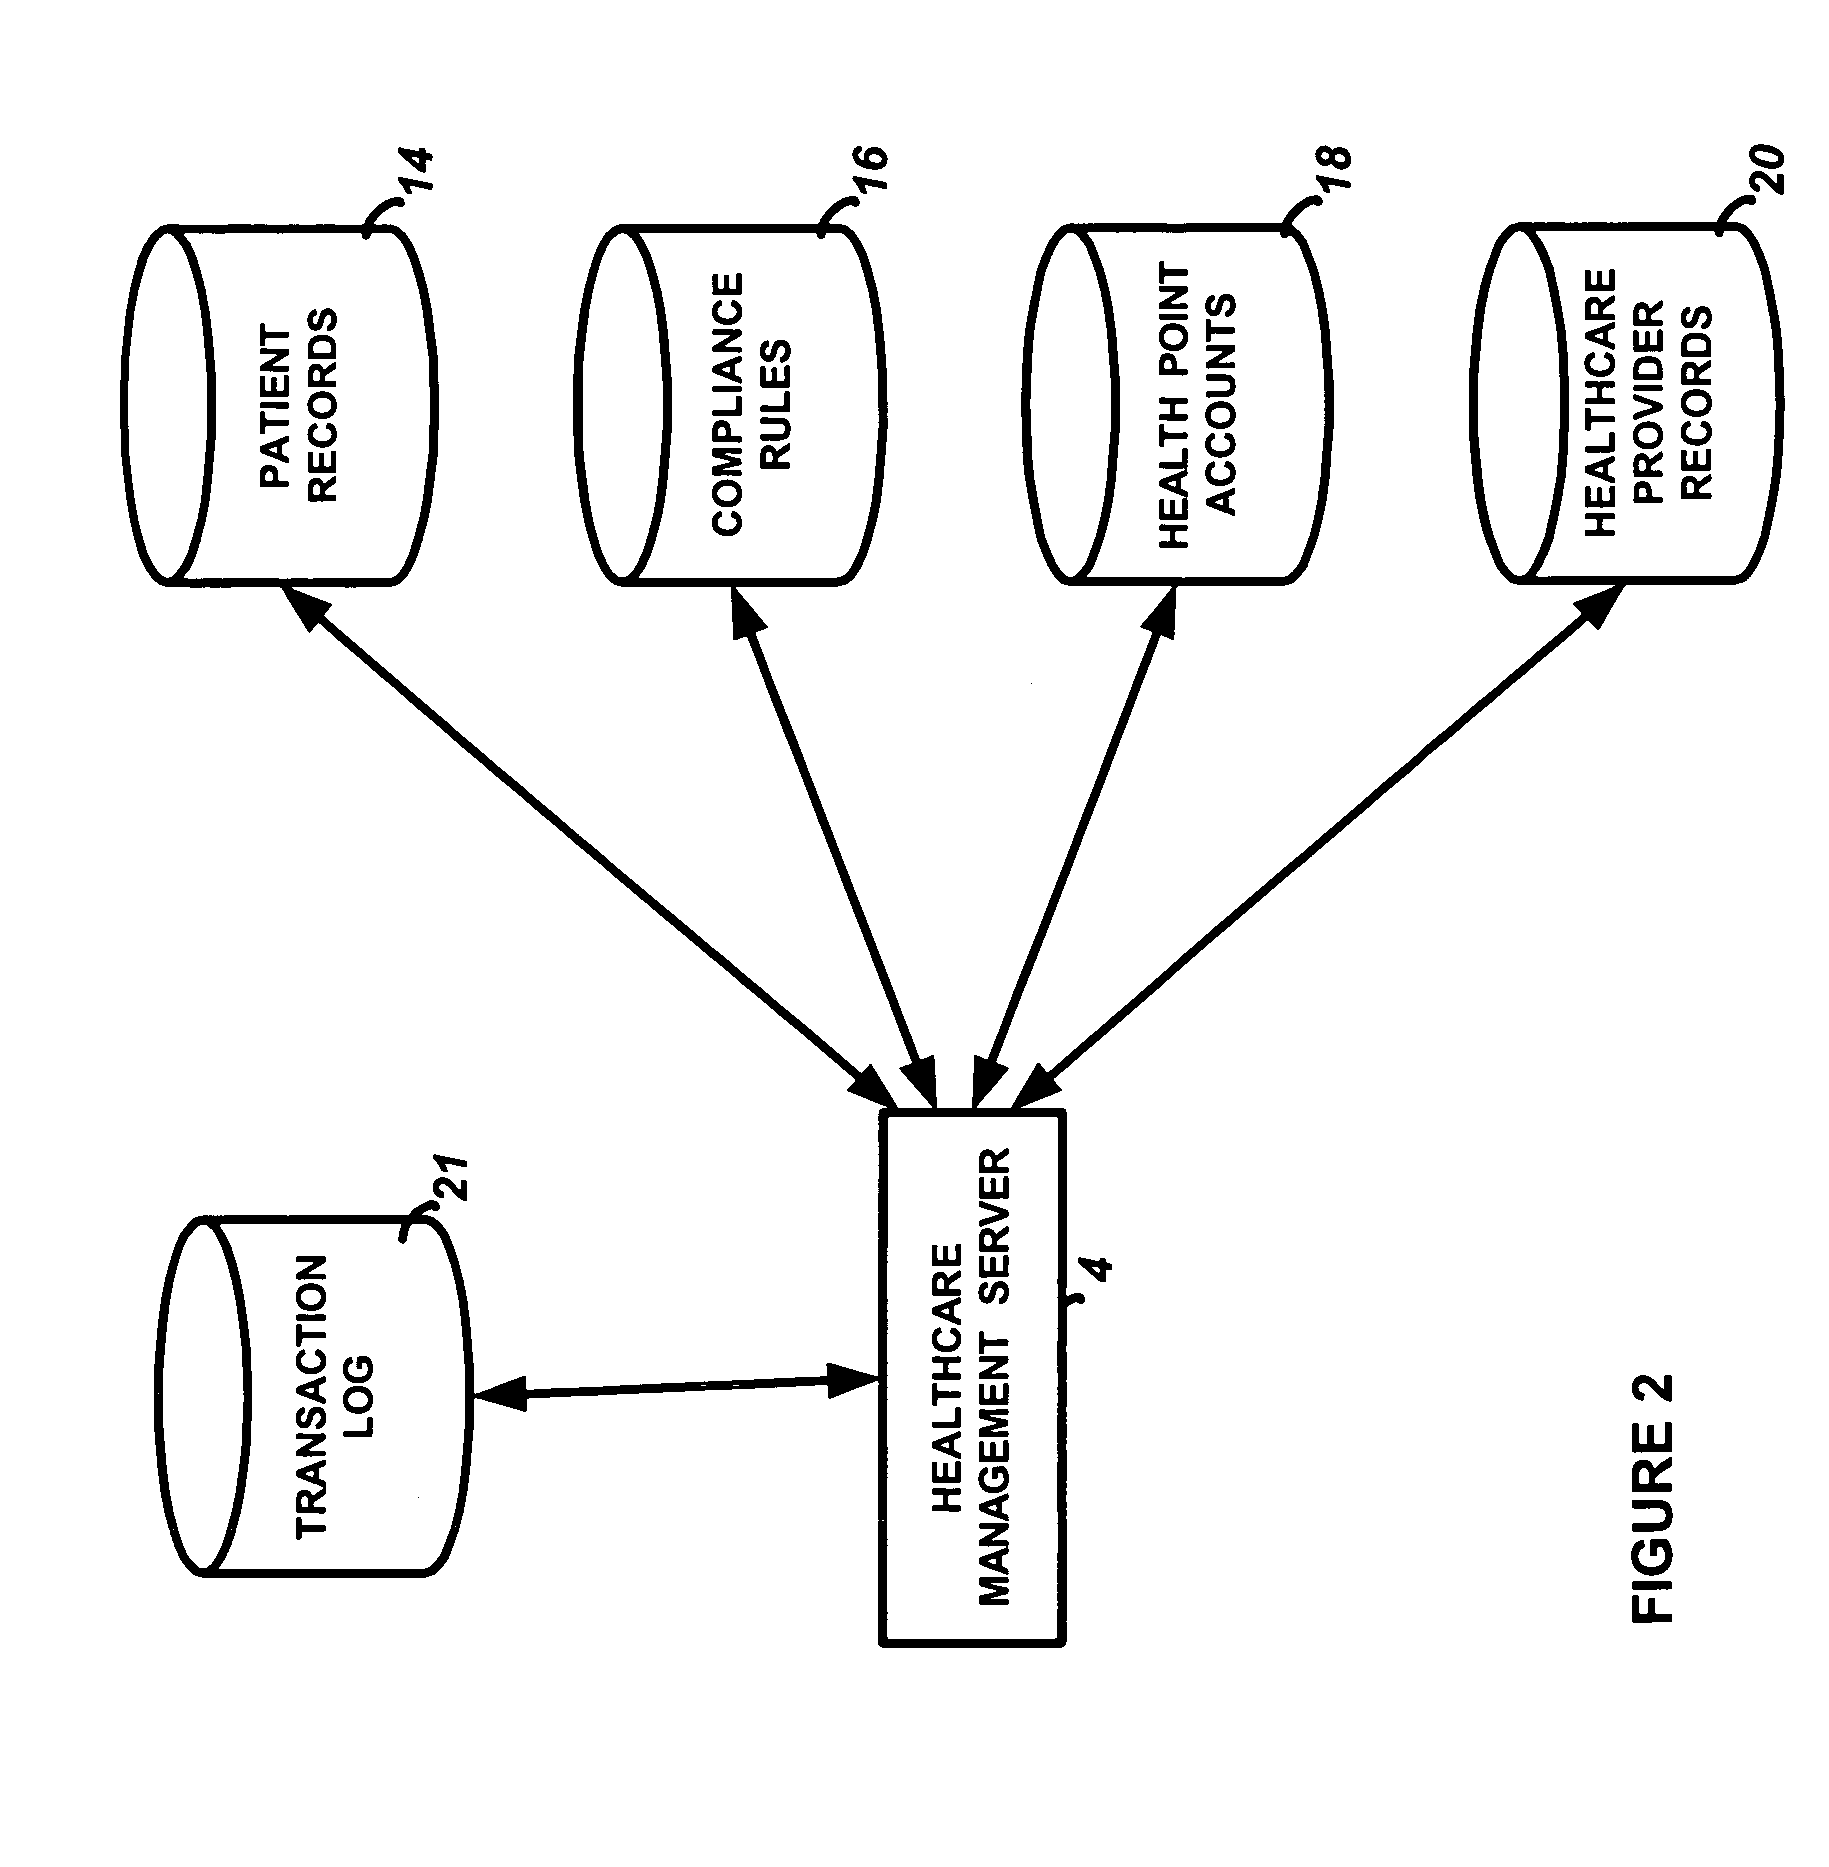 System and method for centralized management and monitoring of healthcare services